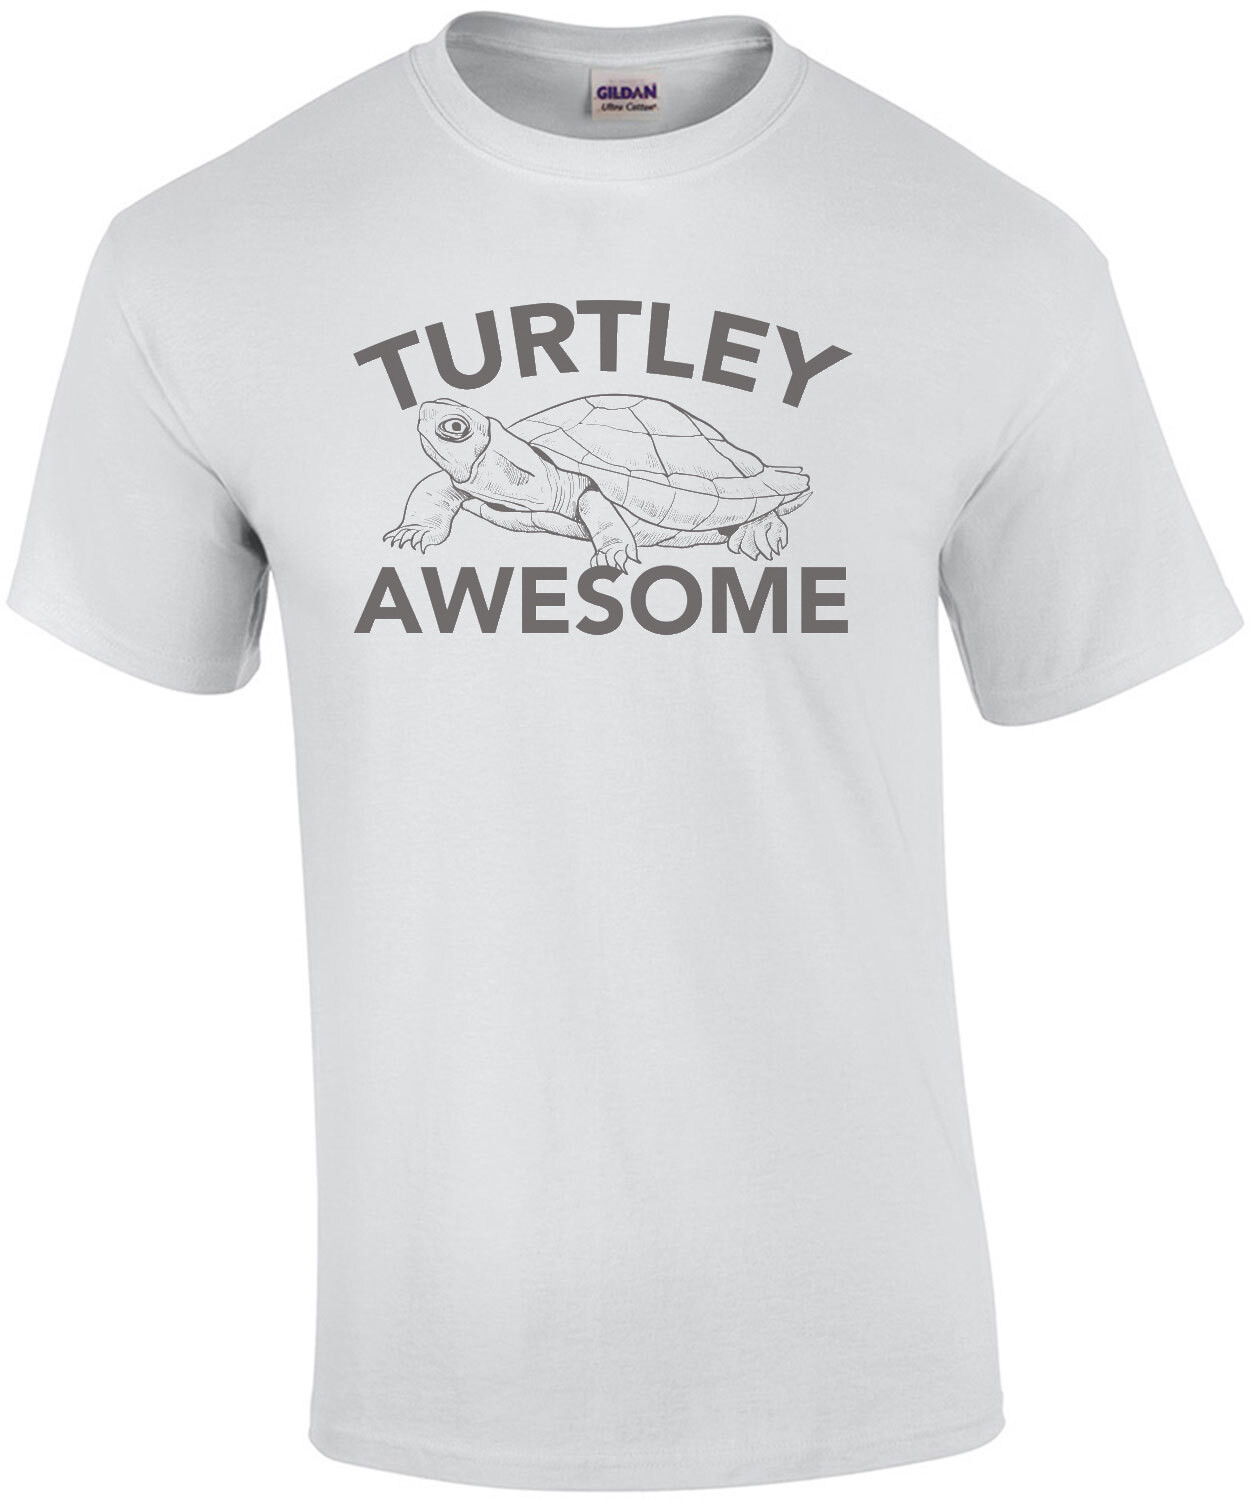 Turtley Awesome - Funny pun t-shirt